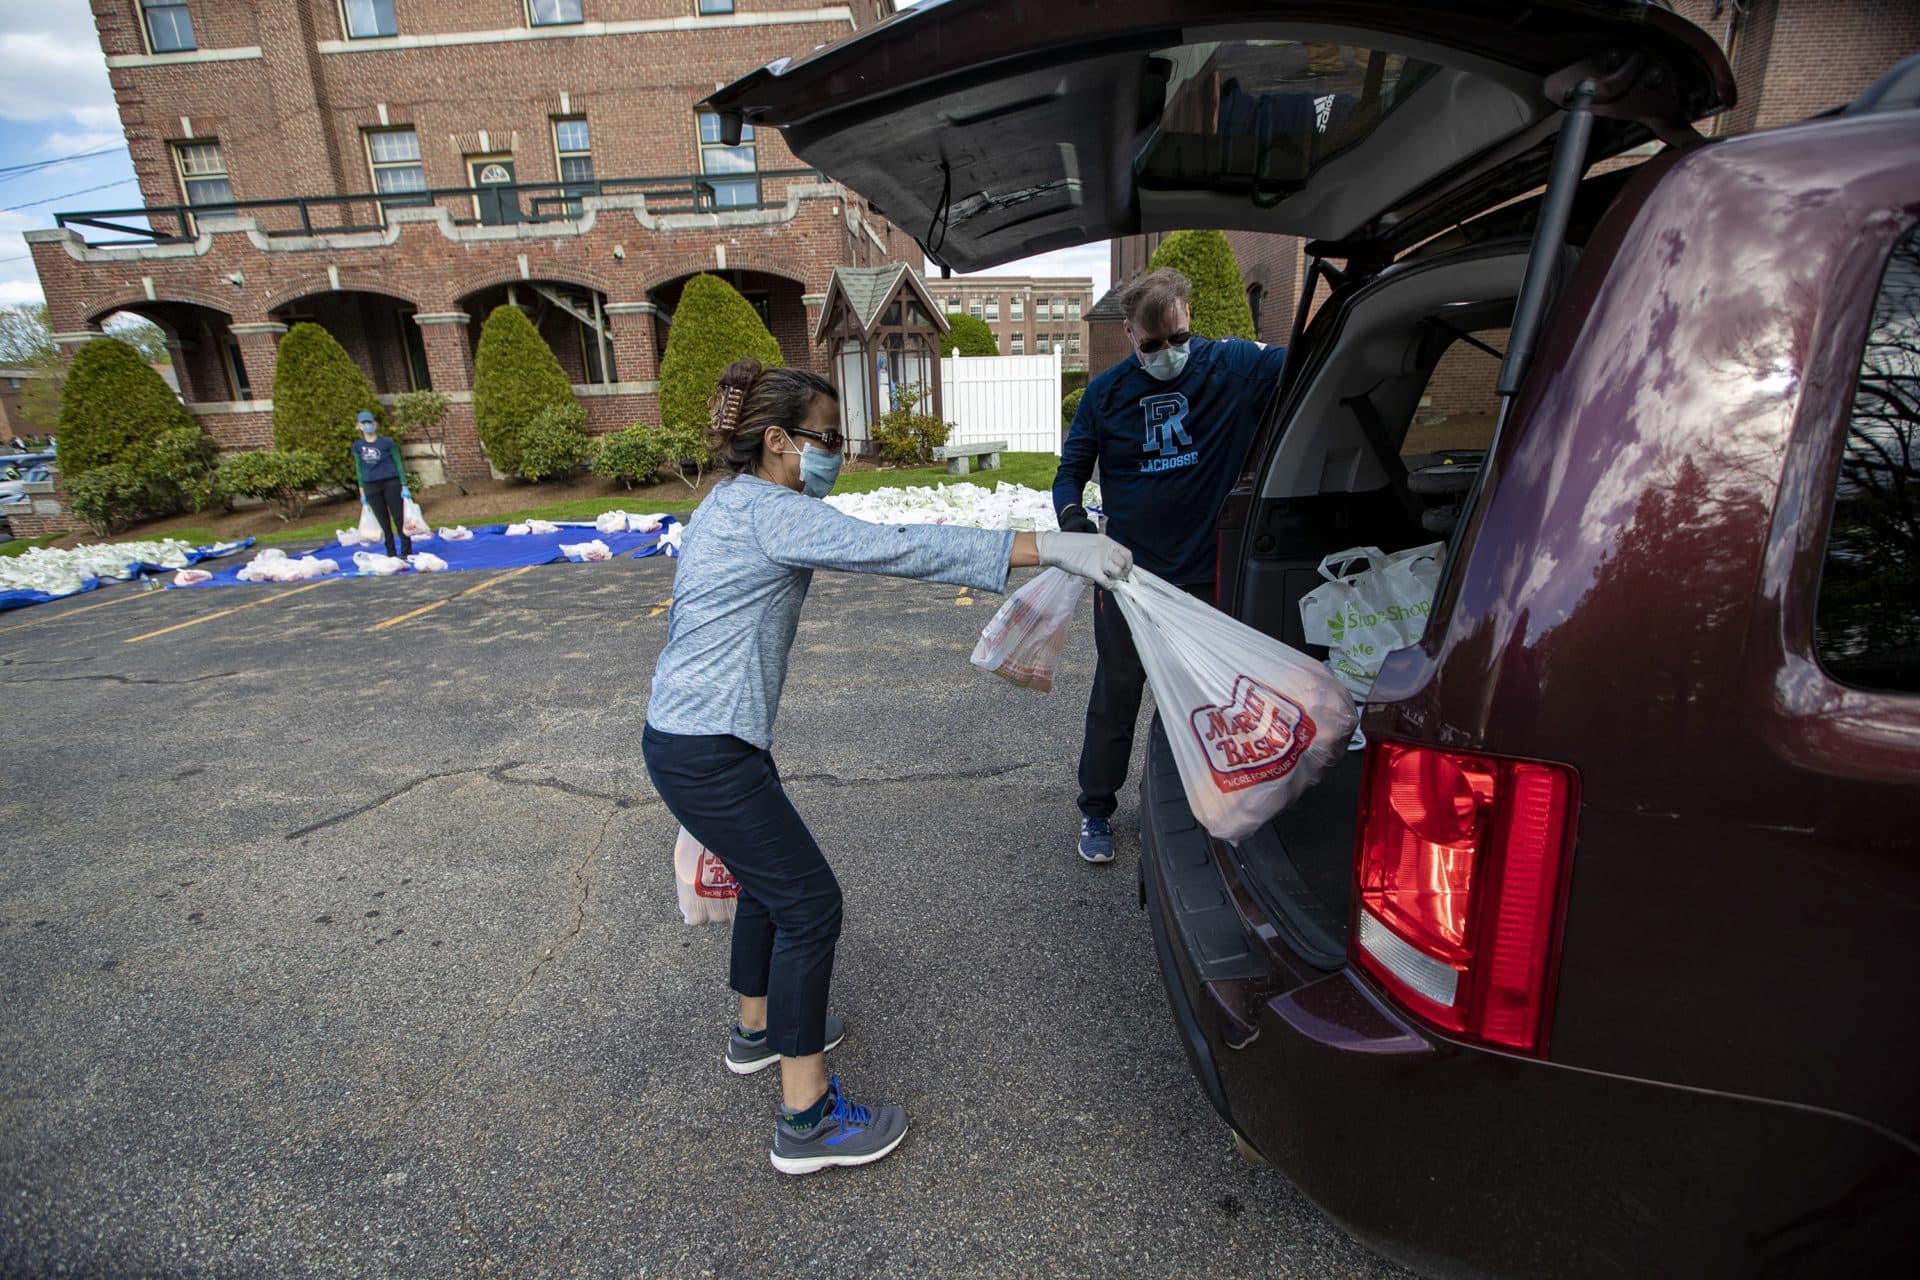 A volunteer places bags of groceries into the back of a minivan. (Jesse Costa/WBUR)